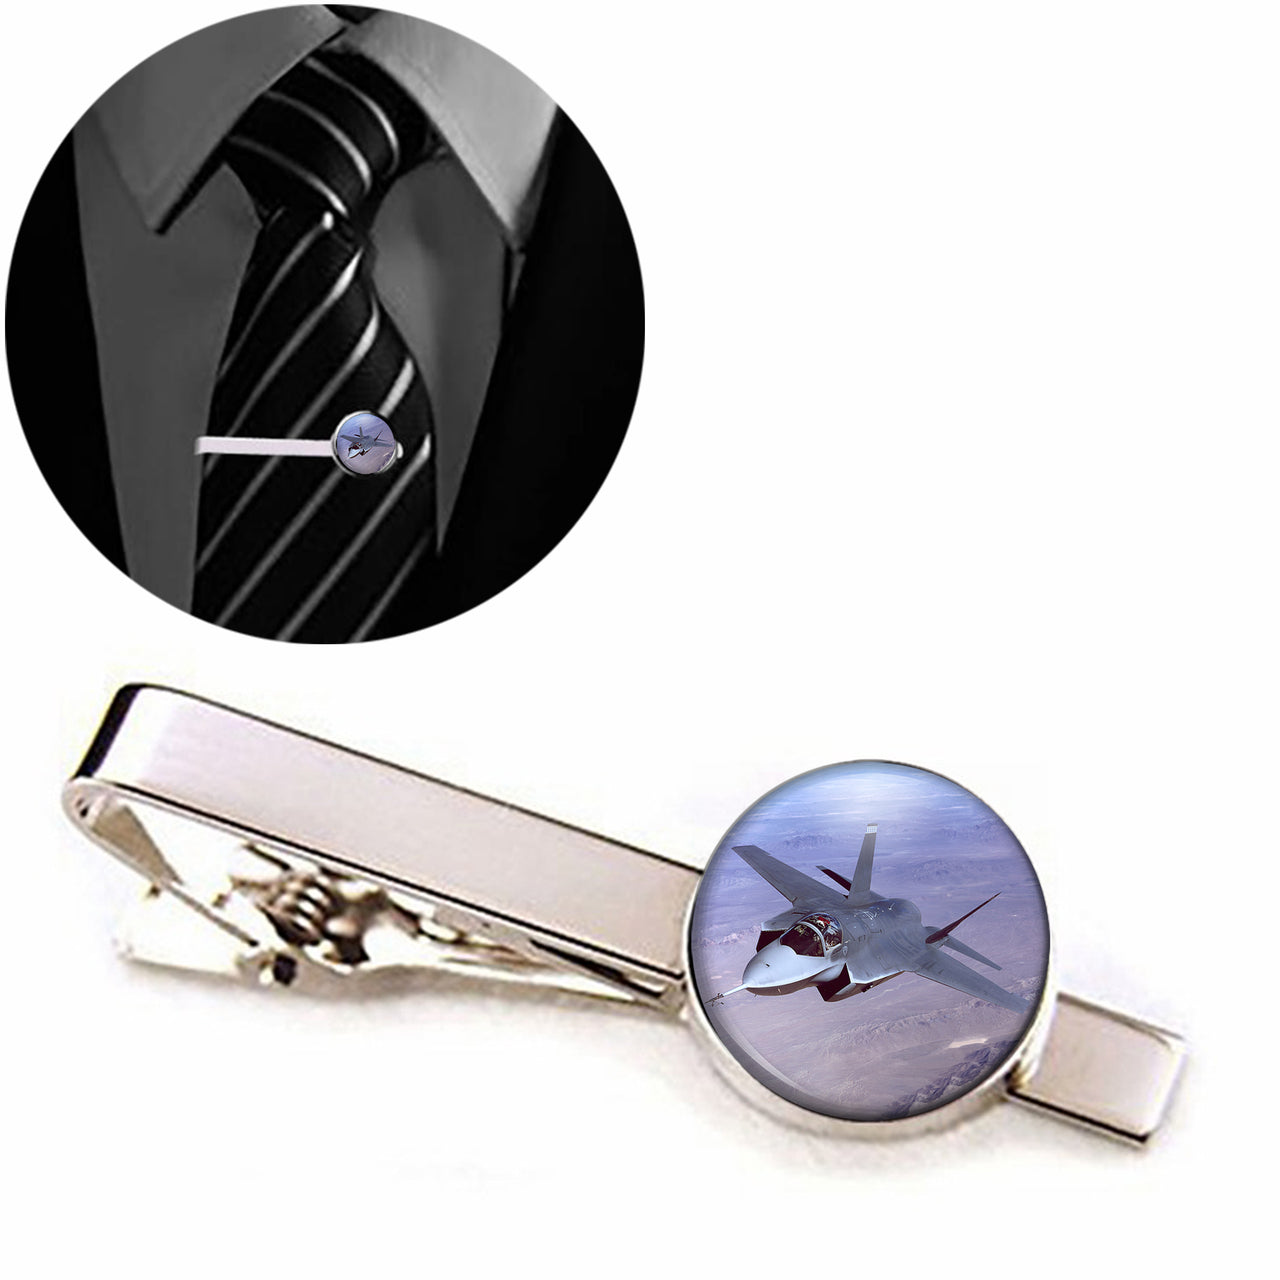 Fighting Falcon F35 Captured in the Air Designed Tie Clips